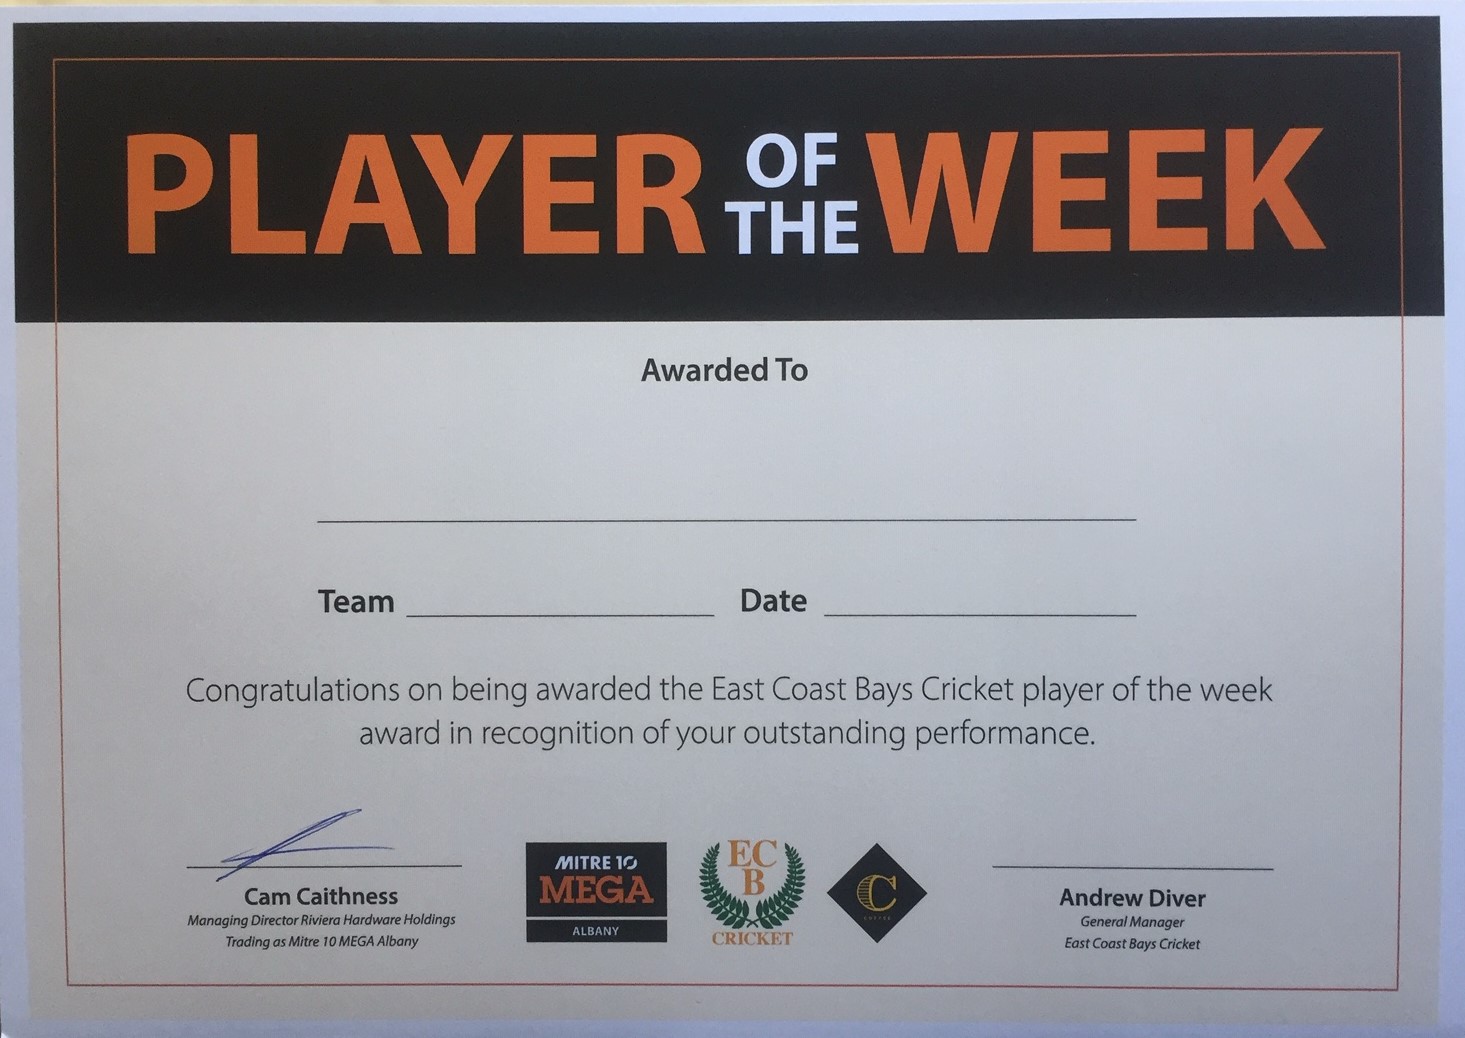 Player of the Week Award